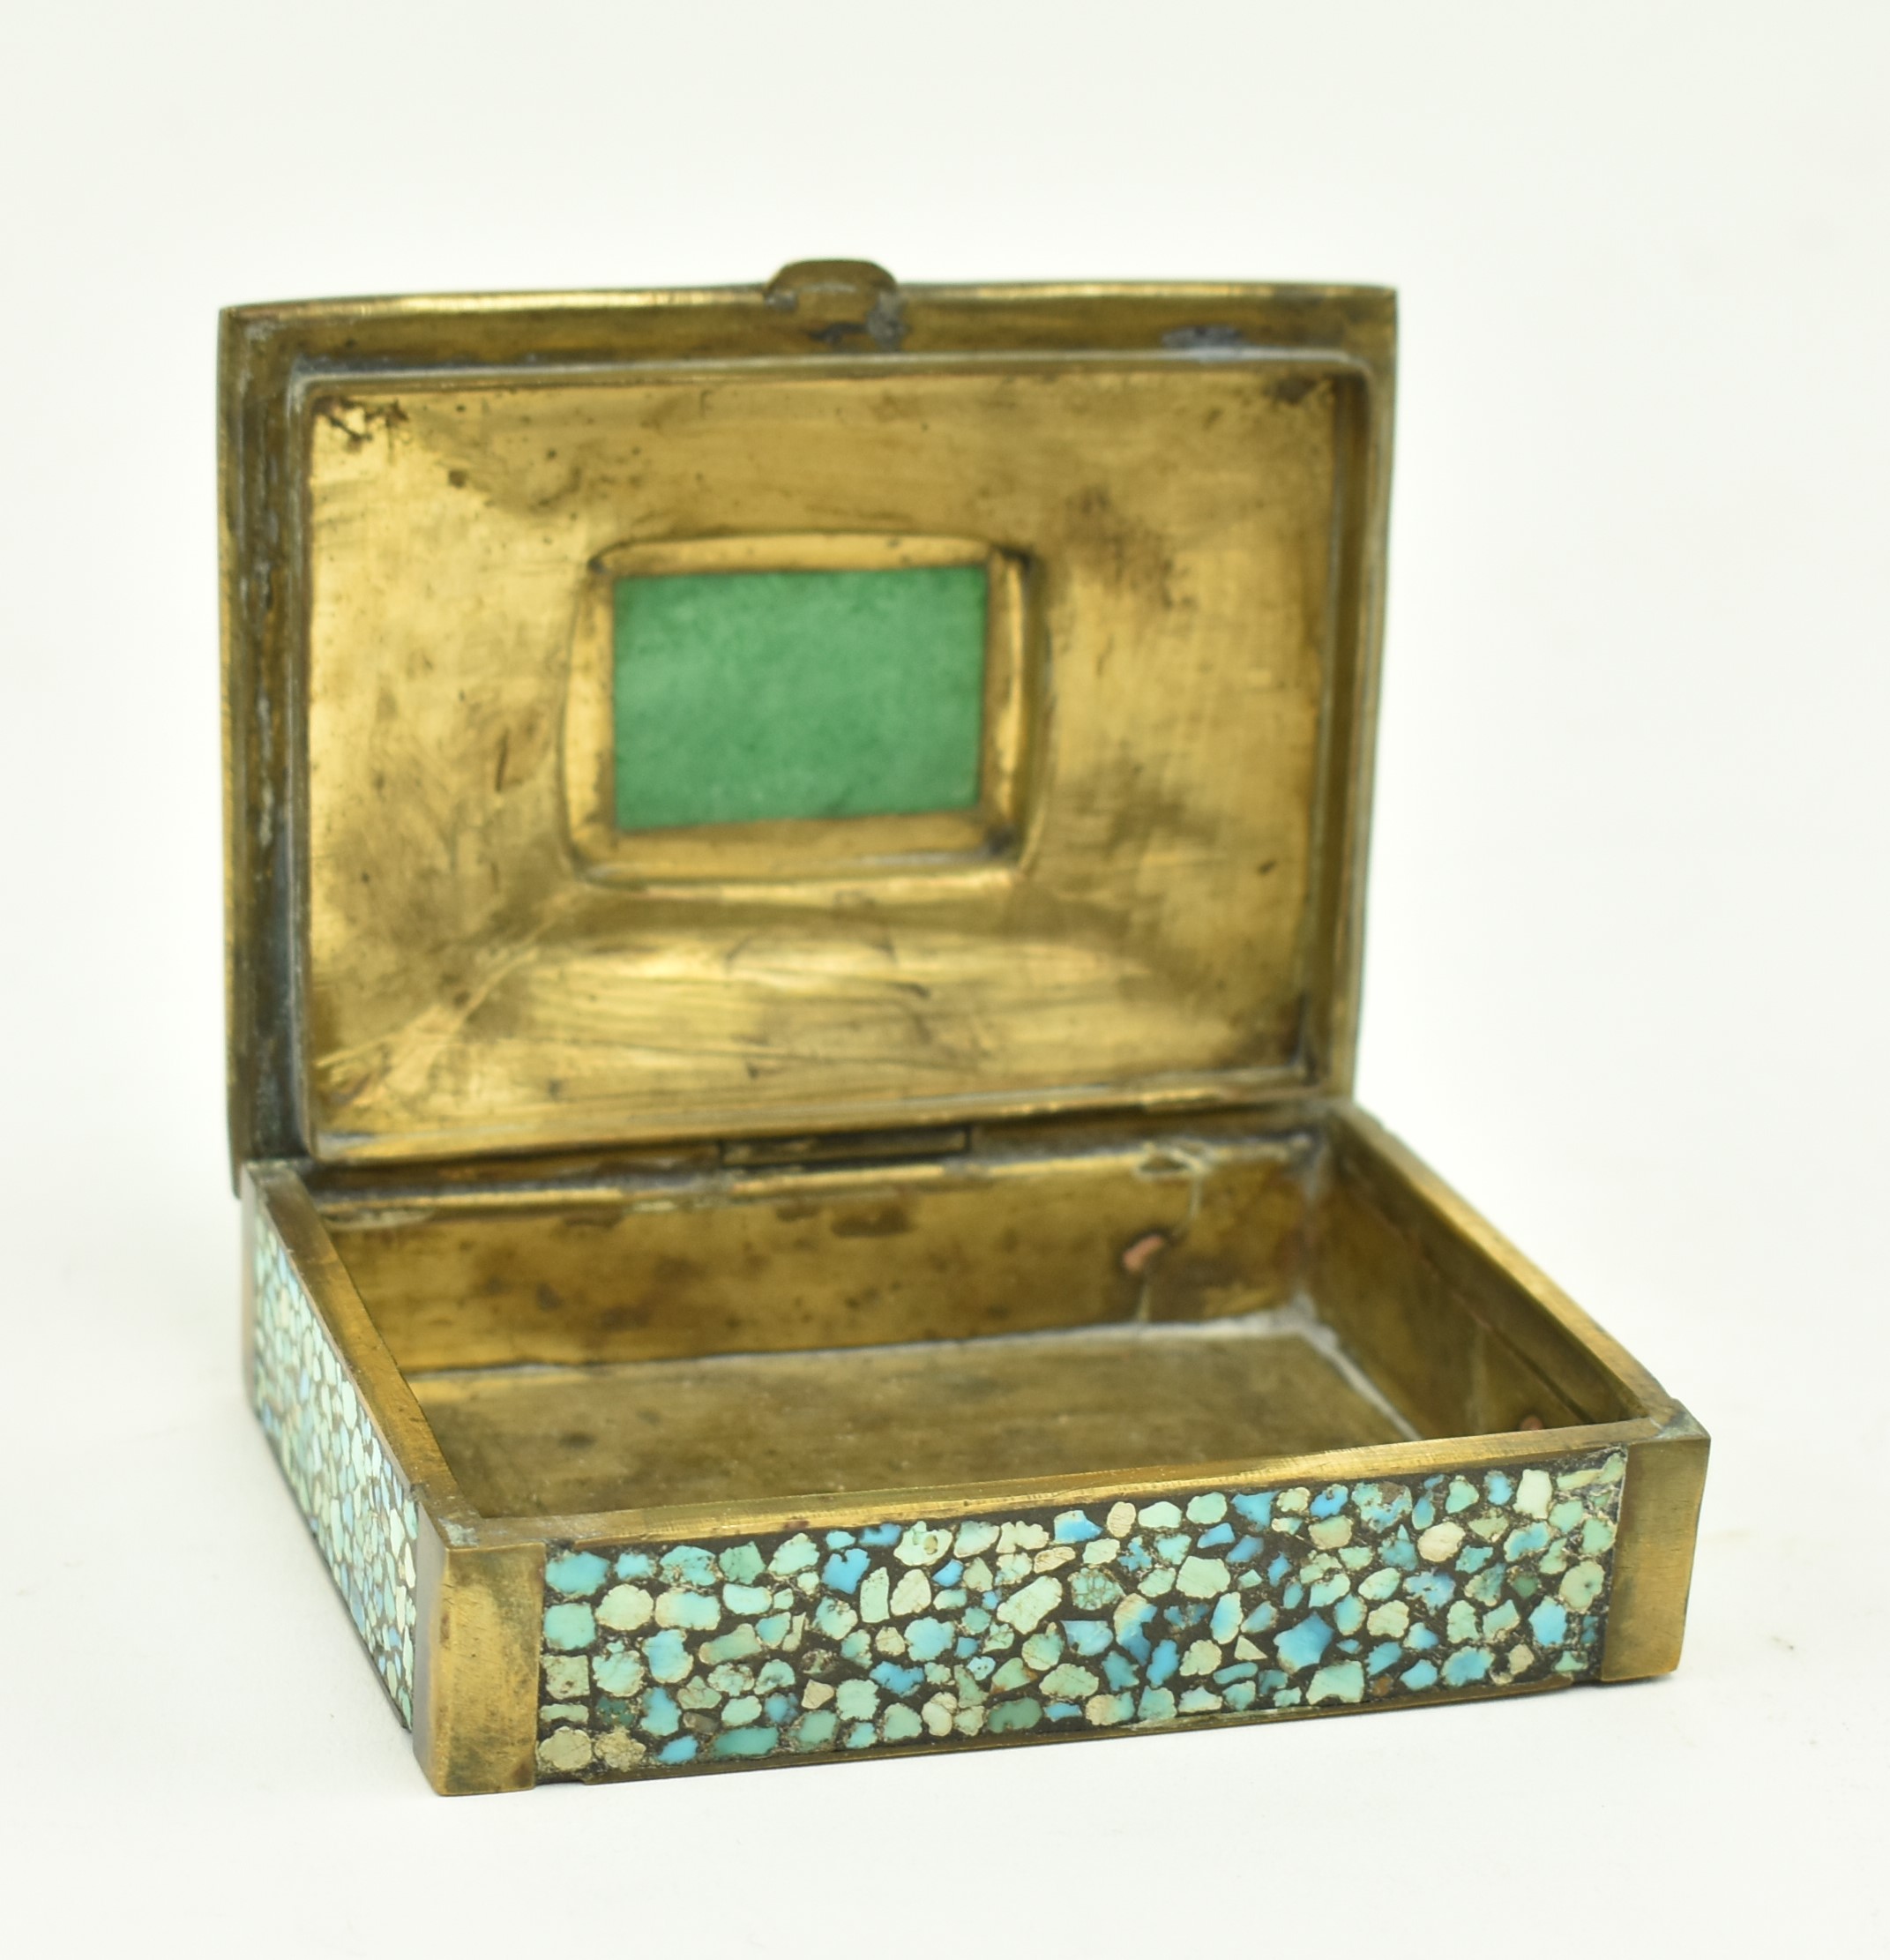 CHINESE LATE 19TH CENTURY BRASS & TURQUOISE INSET TRINKET BOX - Image 3 of 5